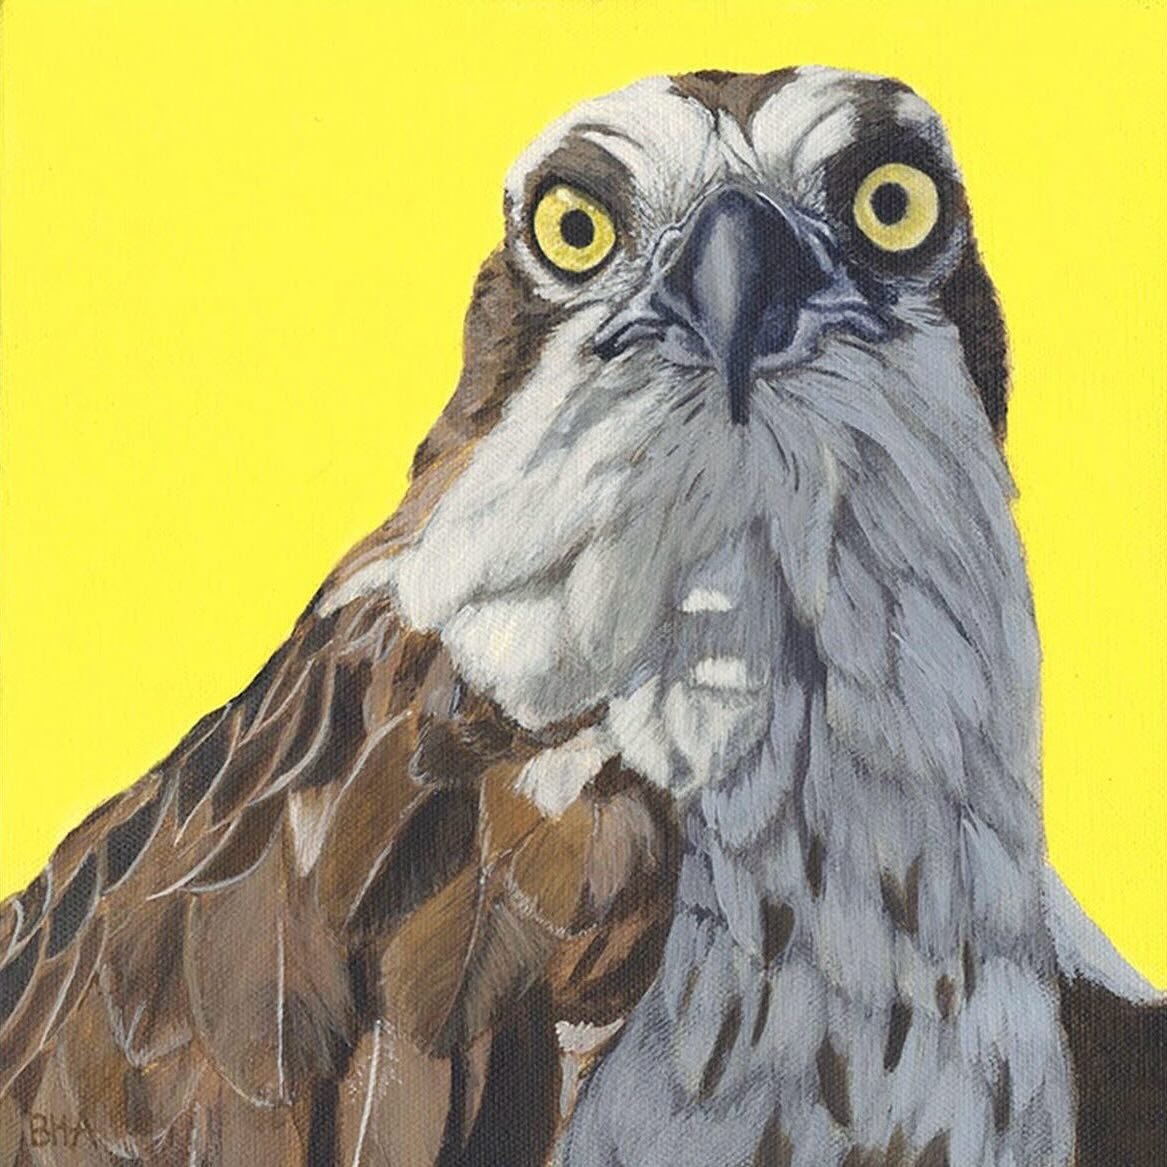 I&rsquo;m working on a black bear at the moment that is reminding me of this piece in some ways. This is one of my favorite paintings. I just feel like this osprey is really saying something😬

&lsquo;Lady Gaze&rsquo;
Sold
Limited Edition Prints Avai